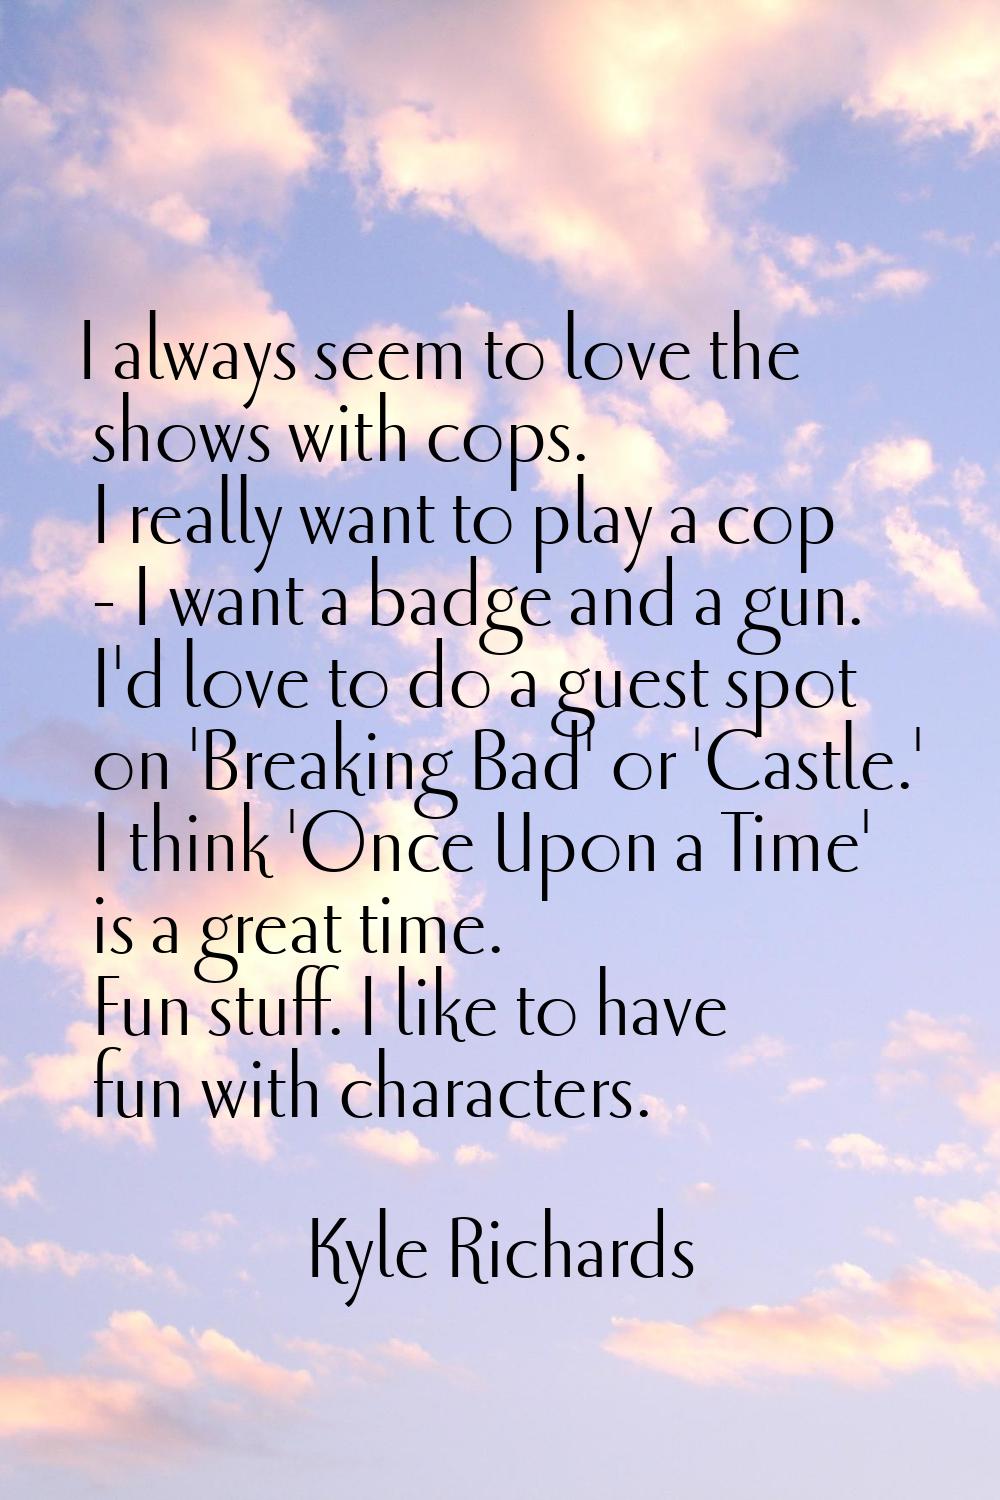 I always seem to love the shows with cops. I really want to play a cop - I want a badge and a gun. 